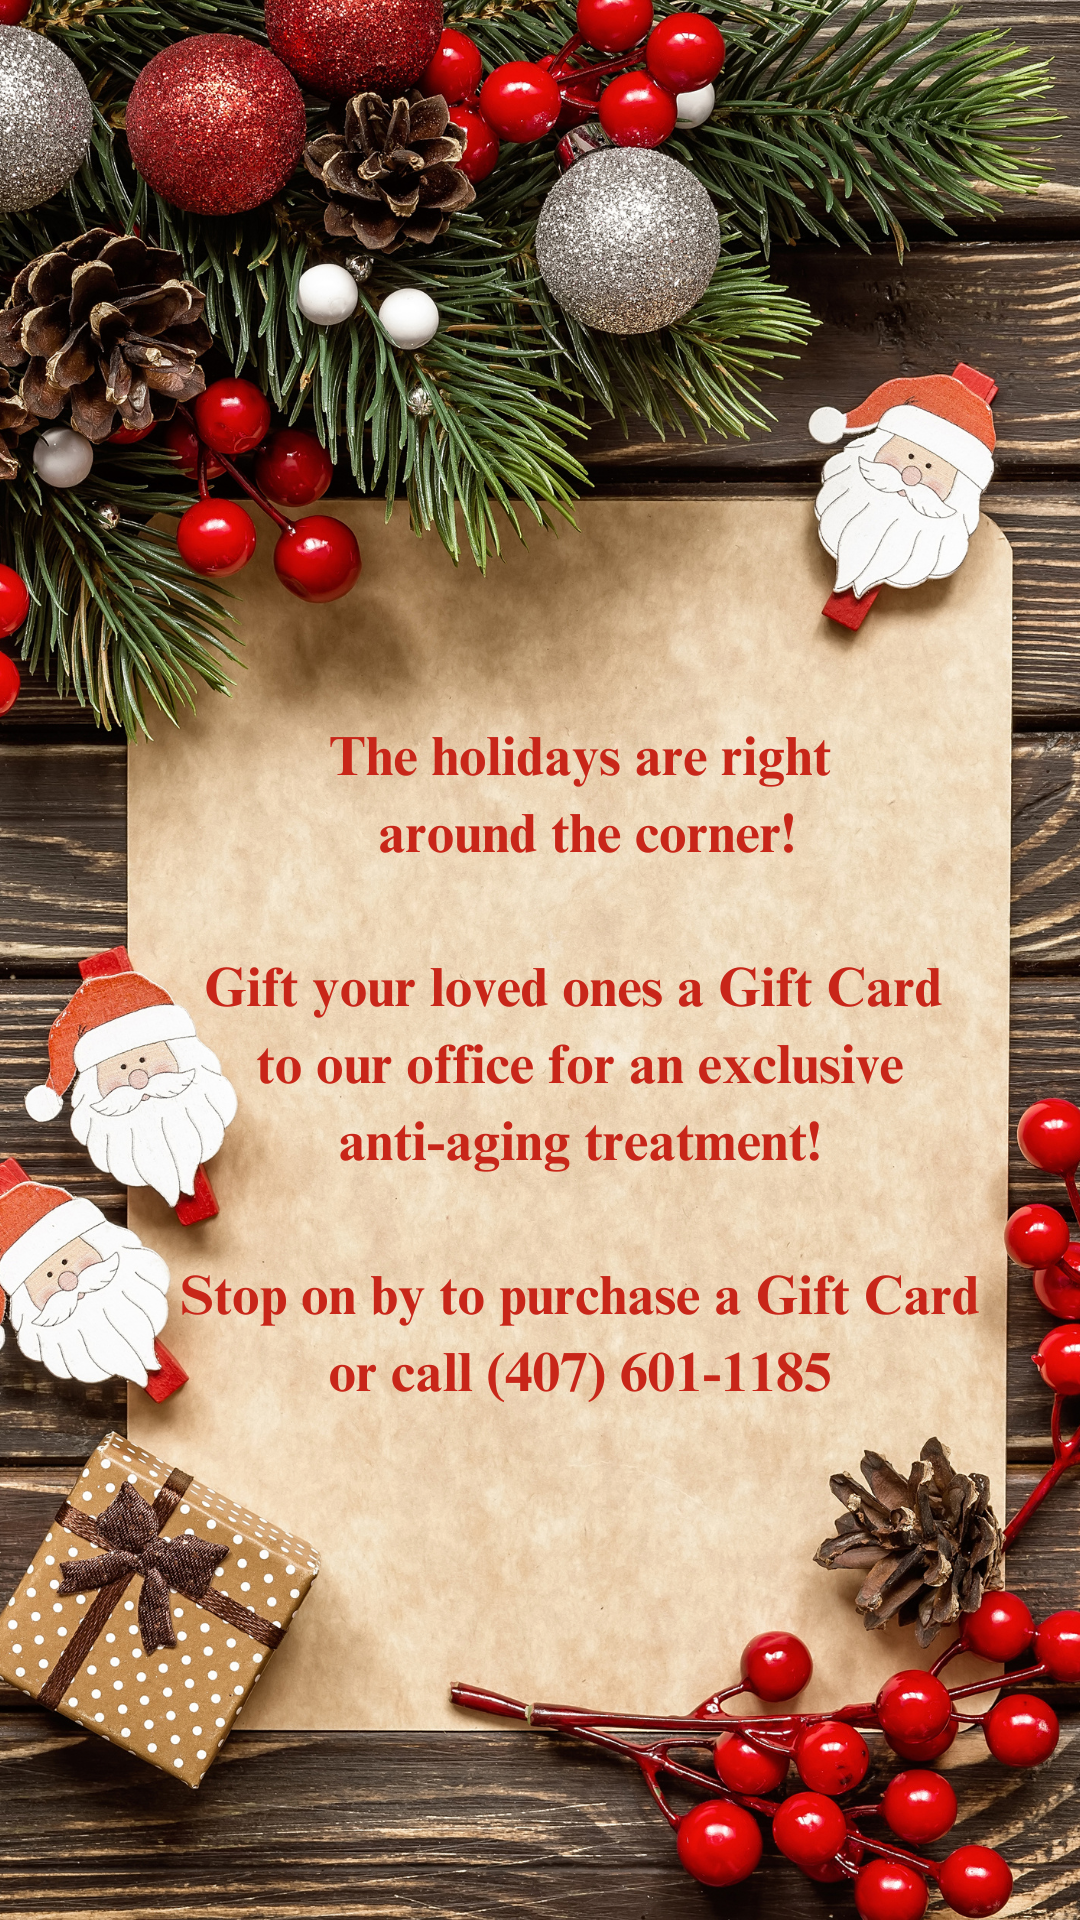 Post by December 1st Christmas Gift Card Flyer